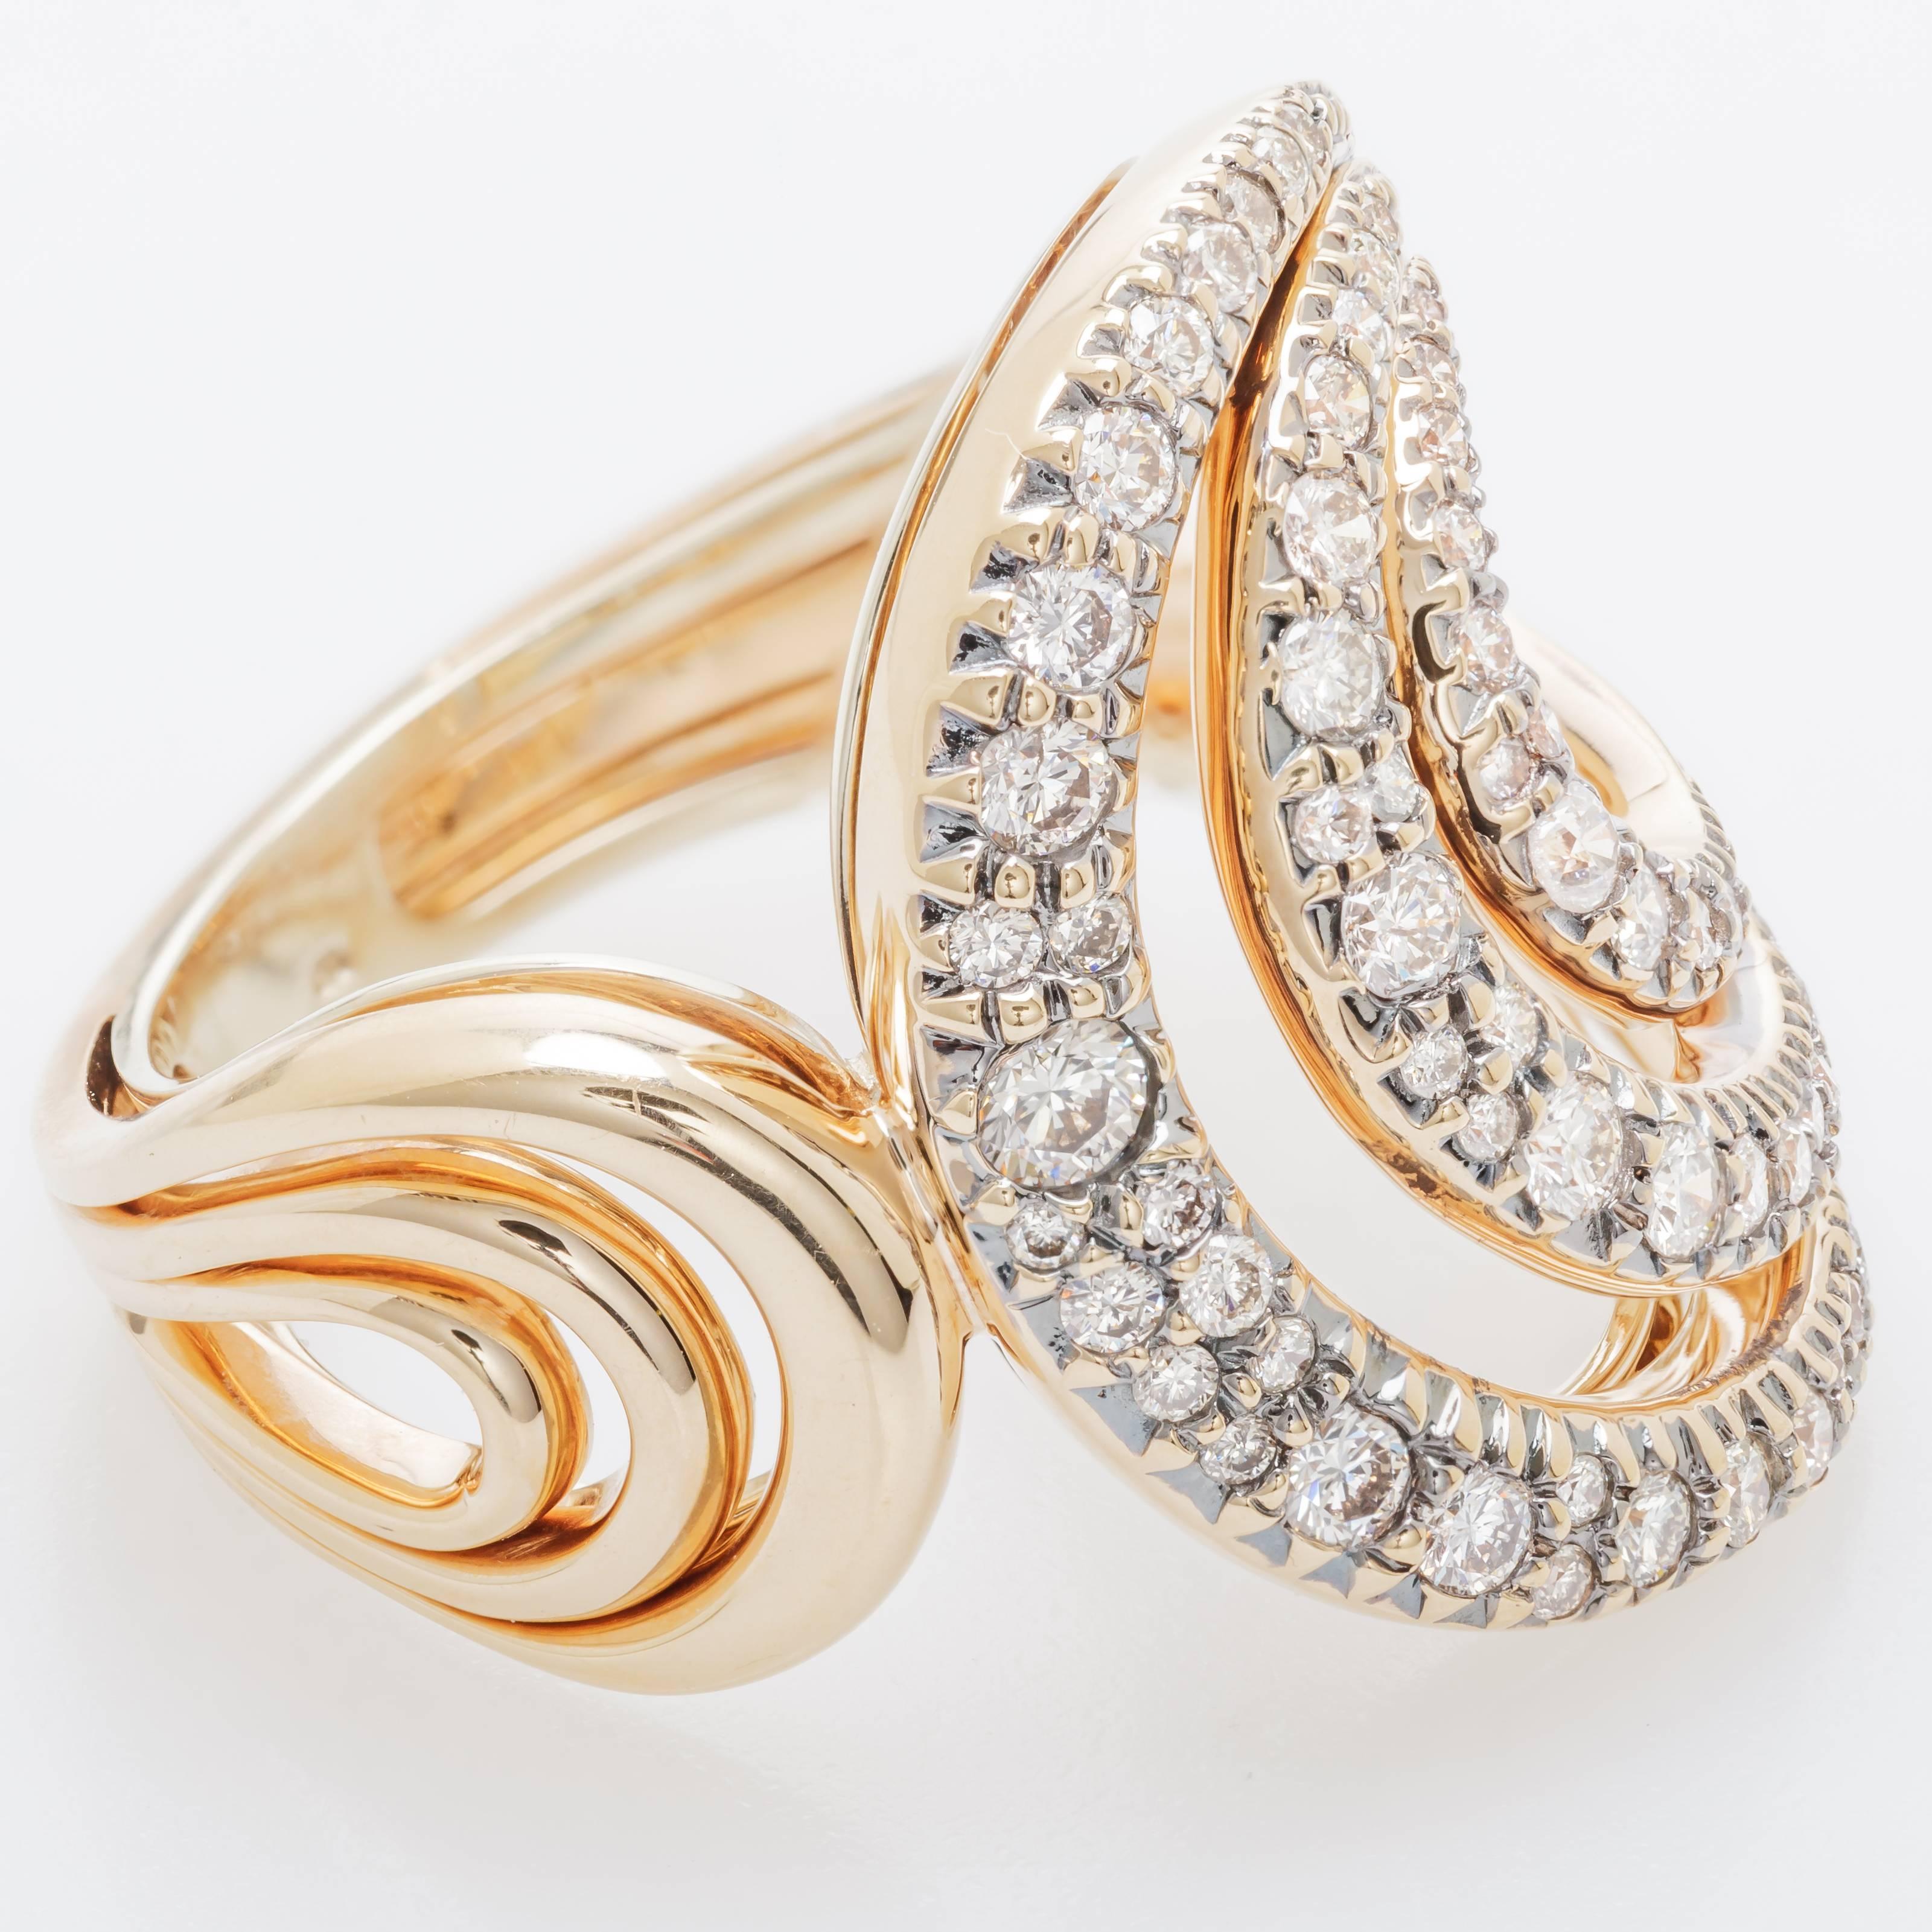 This new H. Stern Iris ring features 64 brown diamonds totaling 0.76ct set in 18K rose and noble gold.  Noble gold, H. Stern's signature alloy, has the warmth of yellow gold and the elegance of white gold.  It measures 1 inch tall, 1 15/16 inches